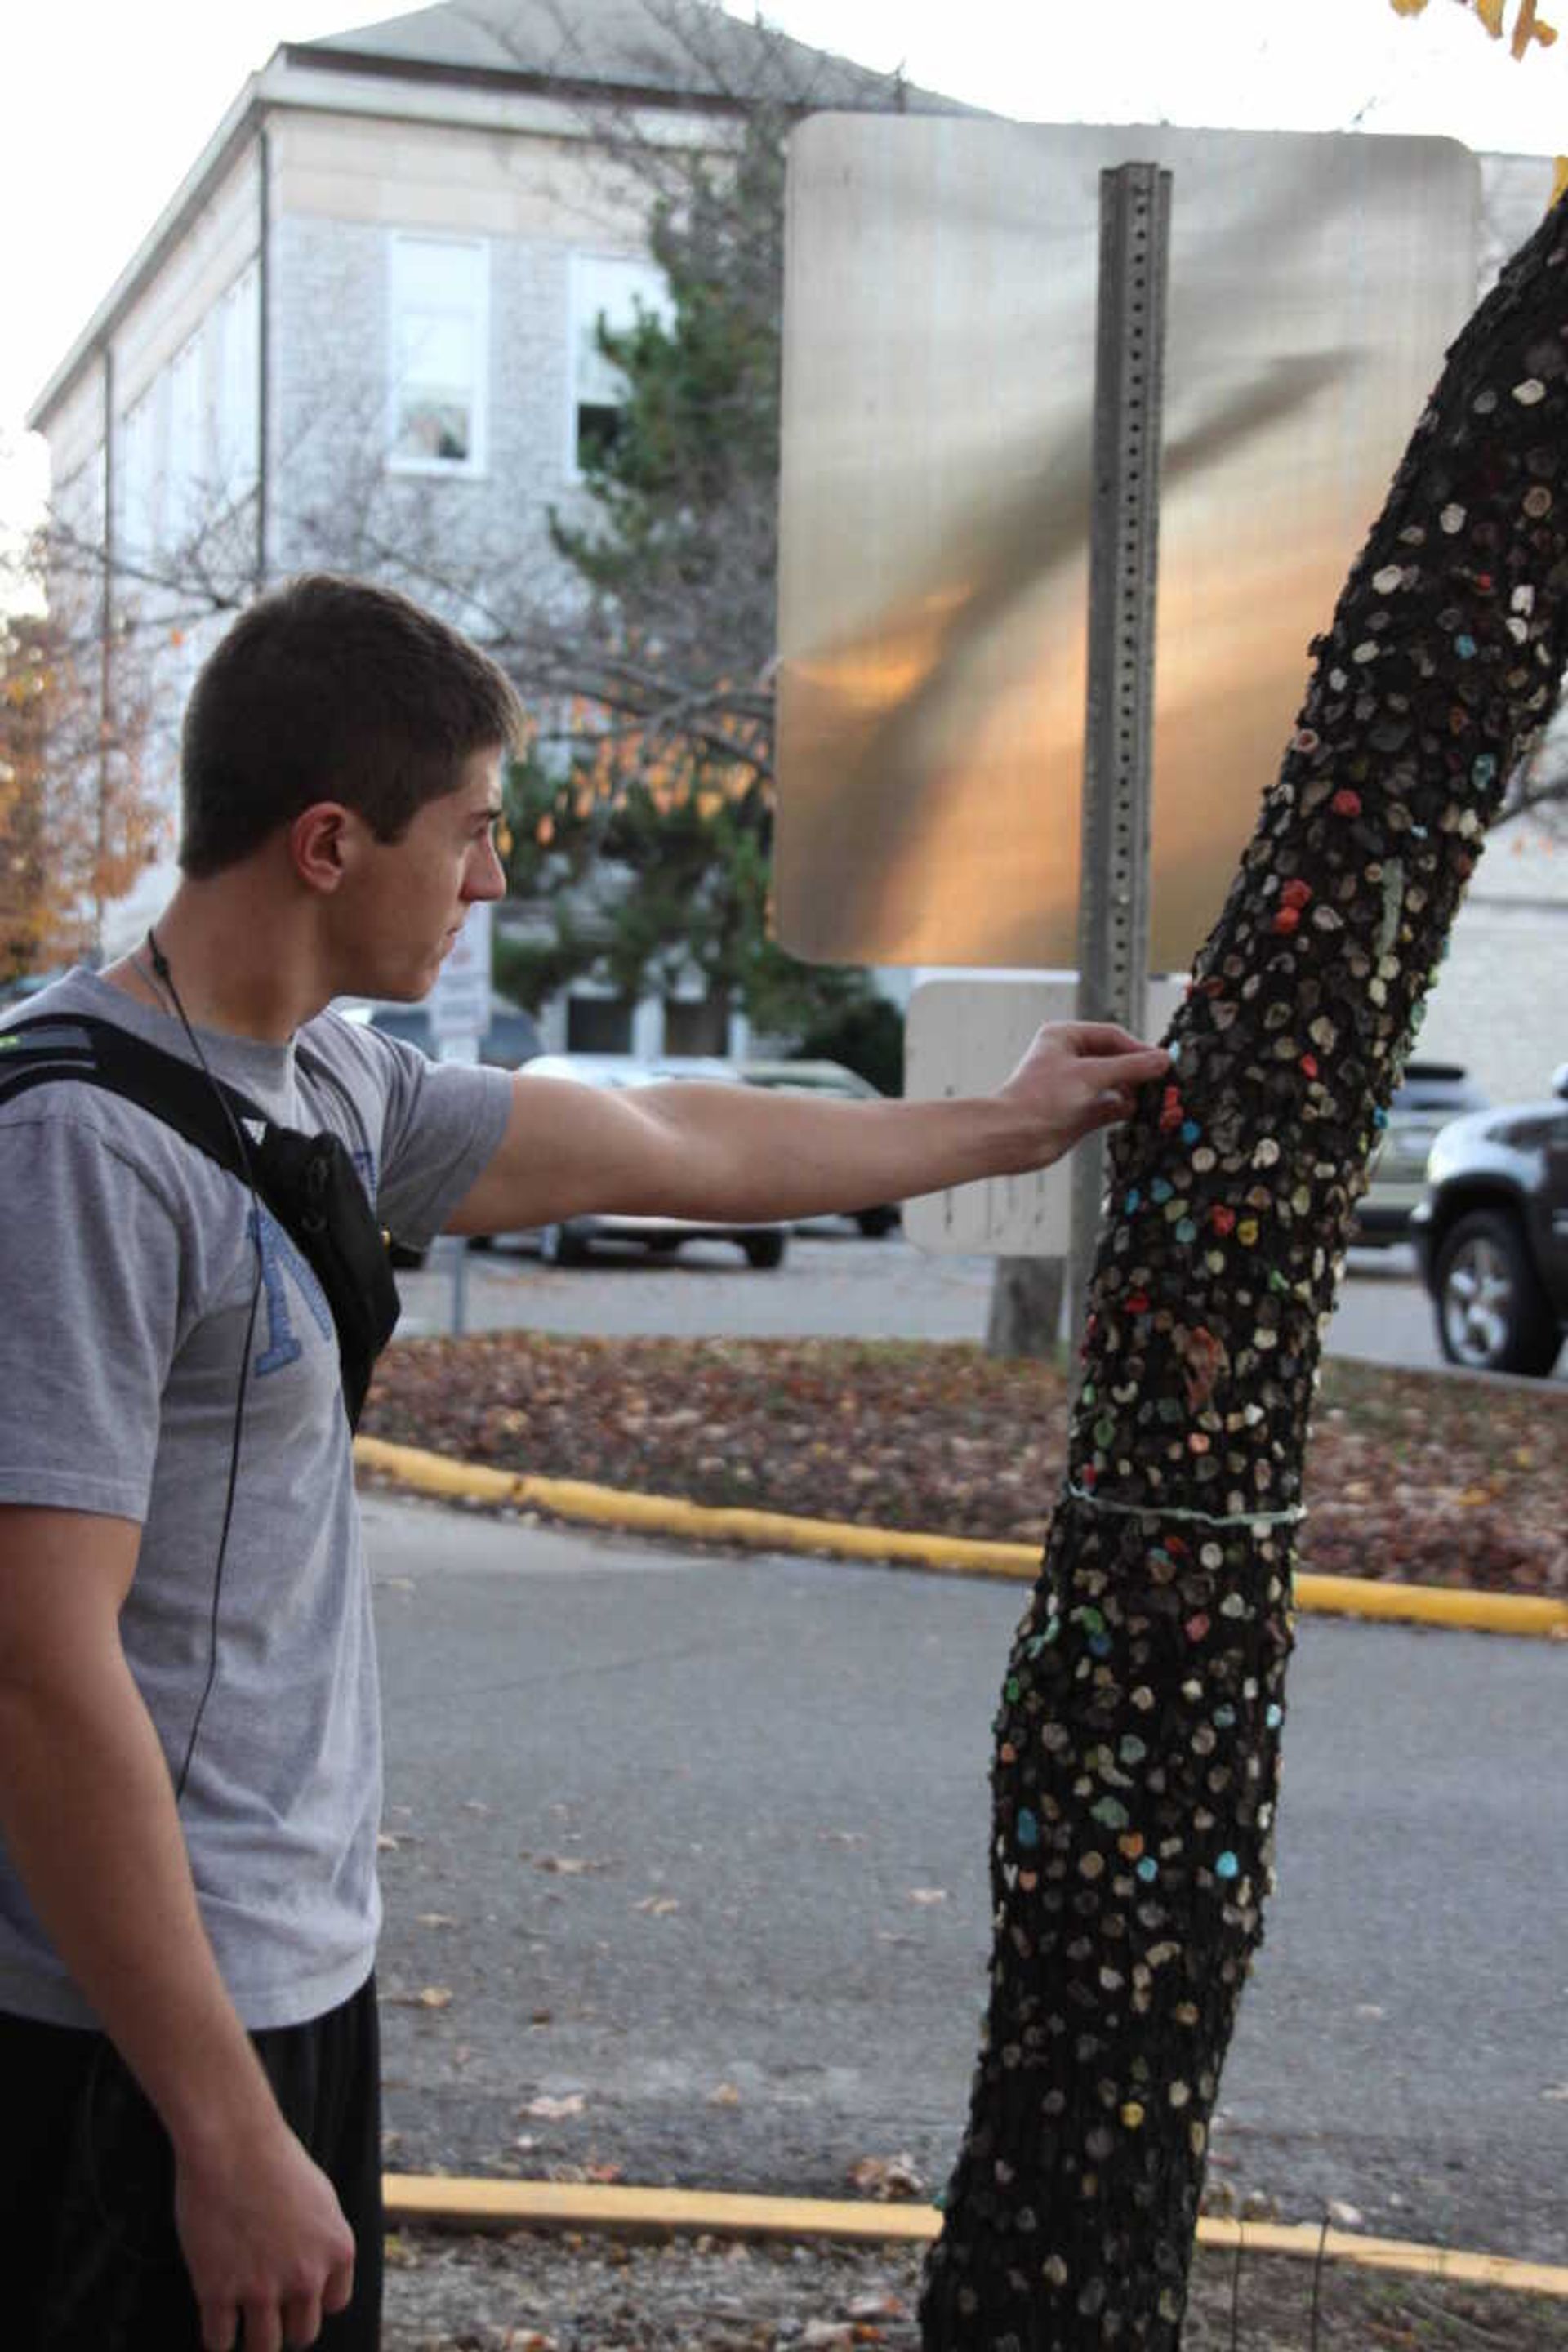 Southeast student Jake Leshe places his gum on the Gum Tree. Photo by Reggie Sanders